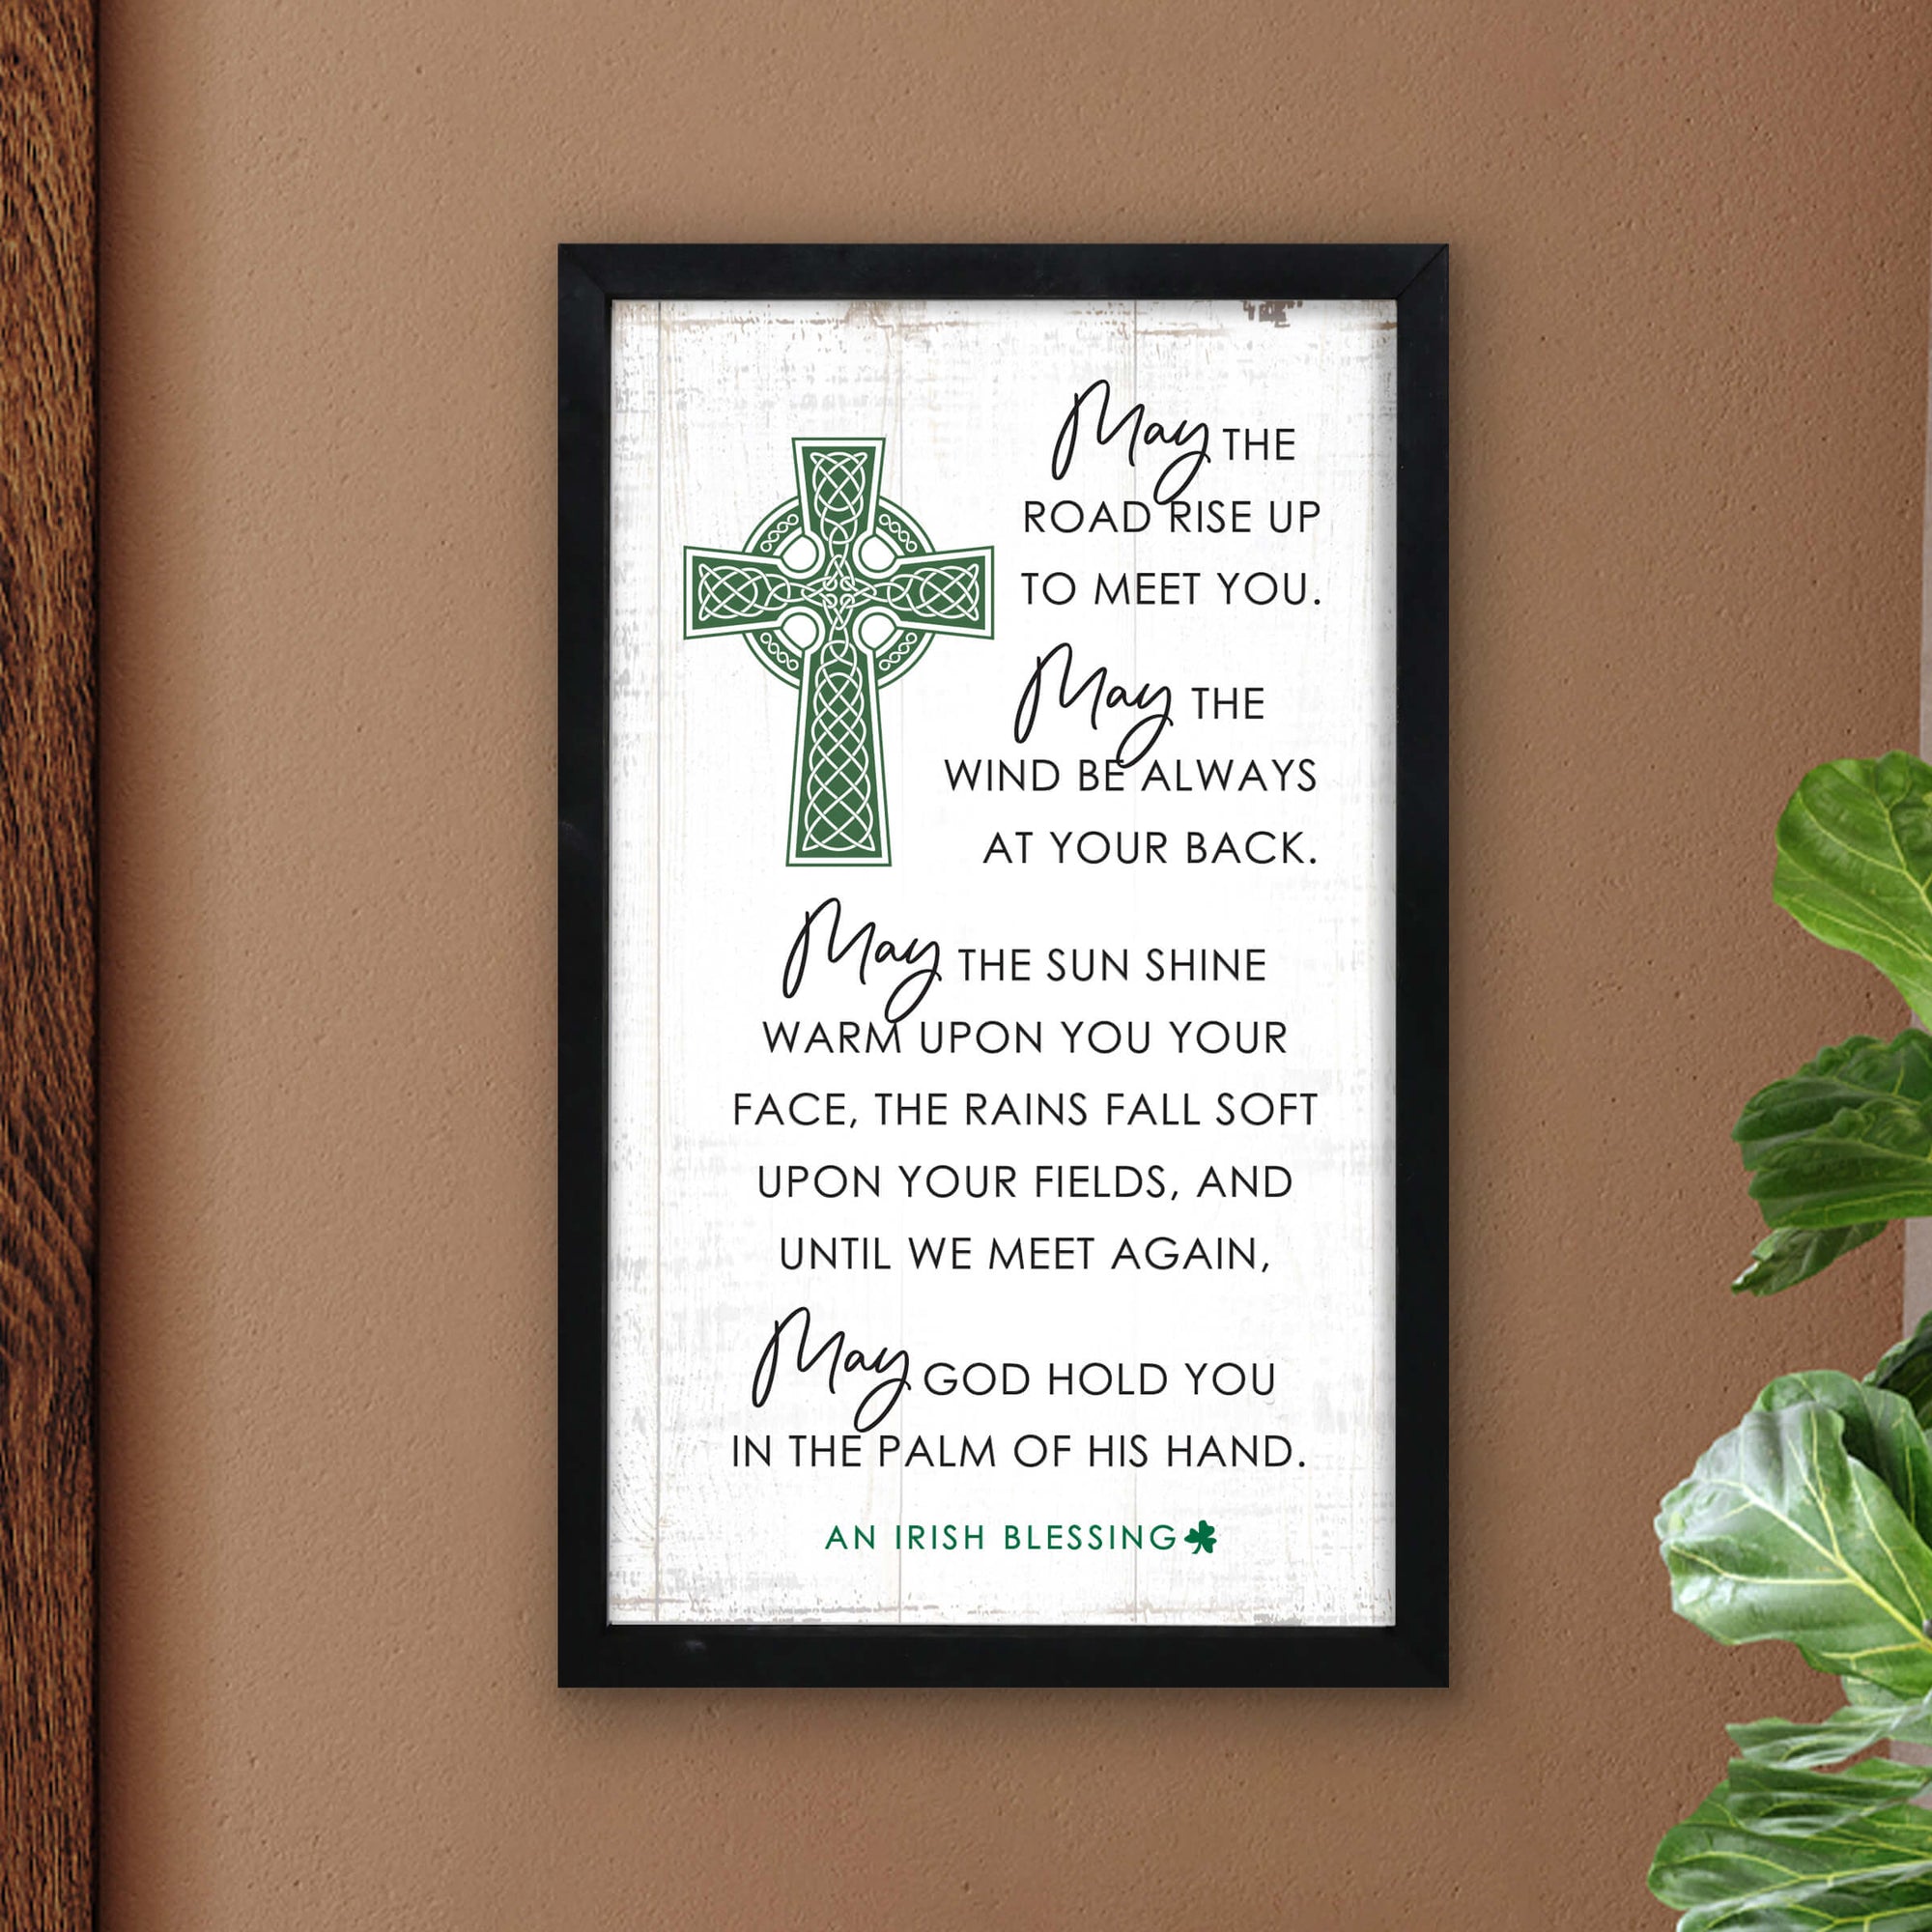 Happy St. Patrick’s Day Framed Shadow Box For Home Decor